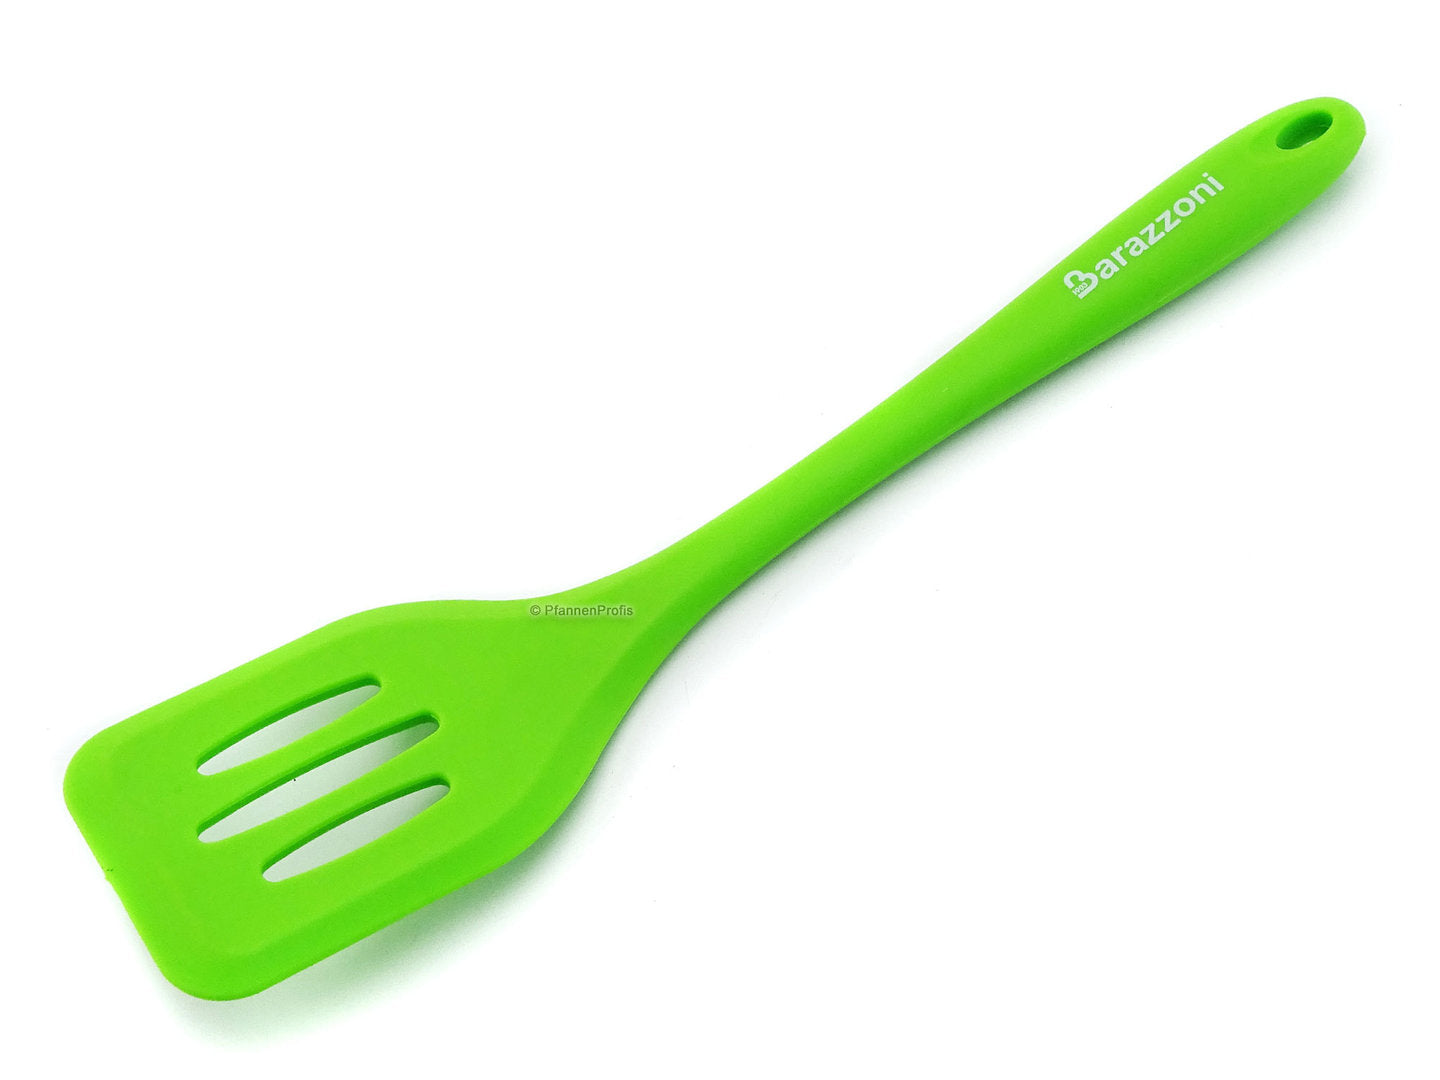 Mainstays Colorful Silicone Spatulas Set with Wooden Handles - Red, Silver, Green & Blue - 4 ct